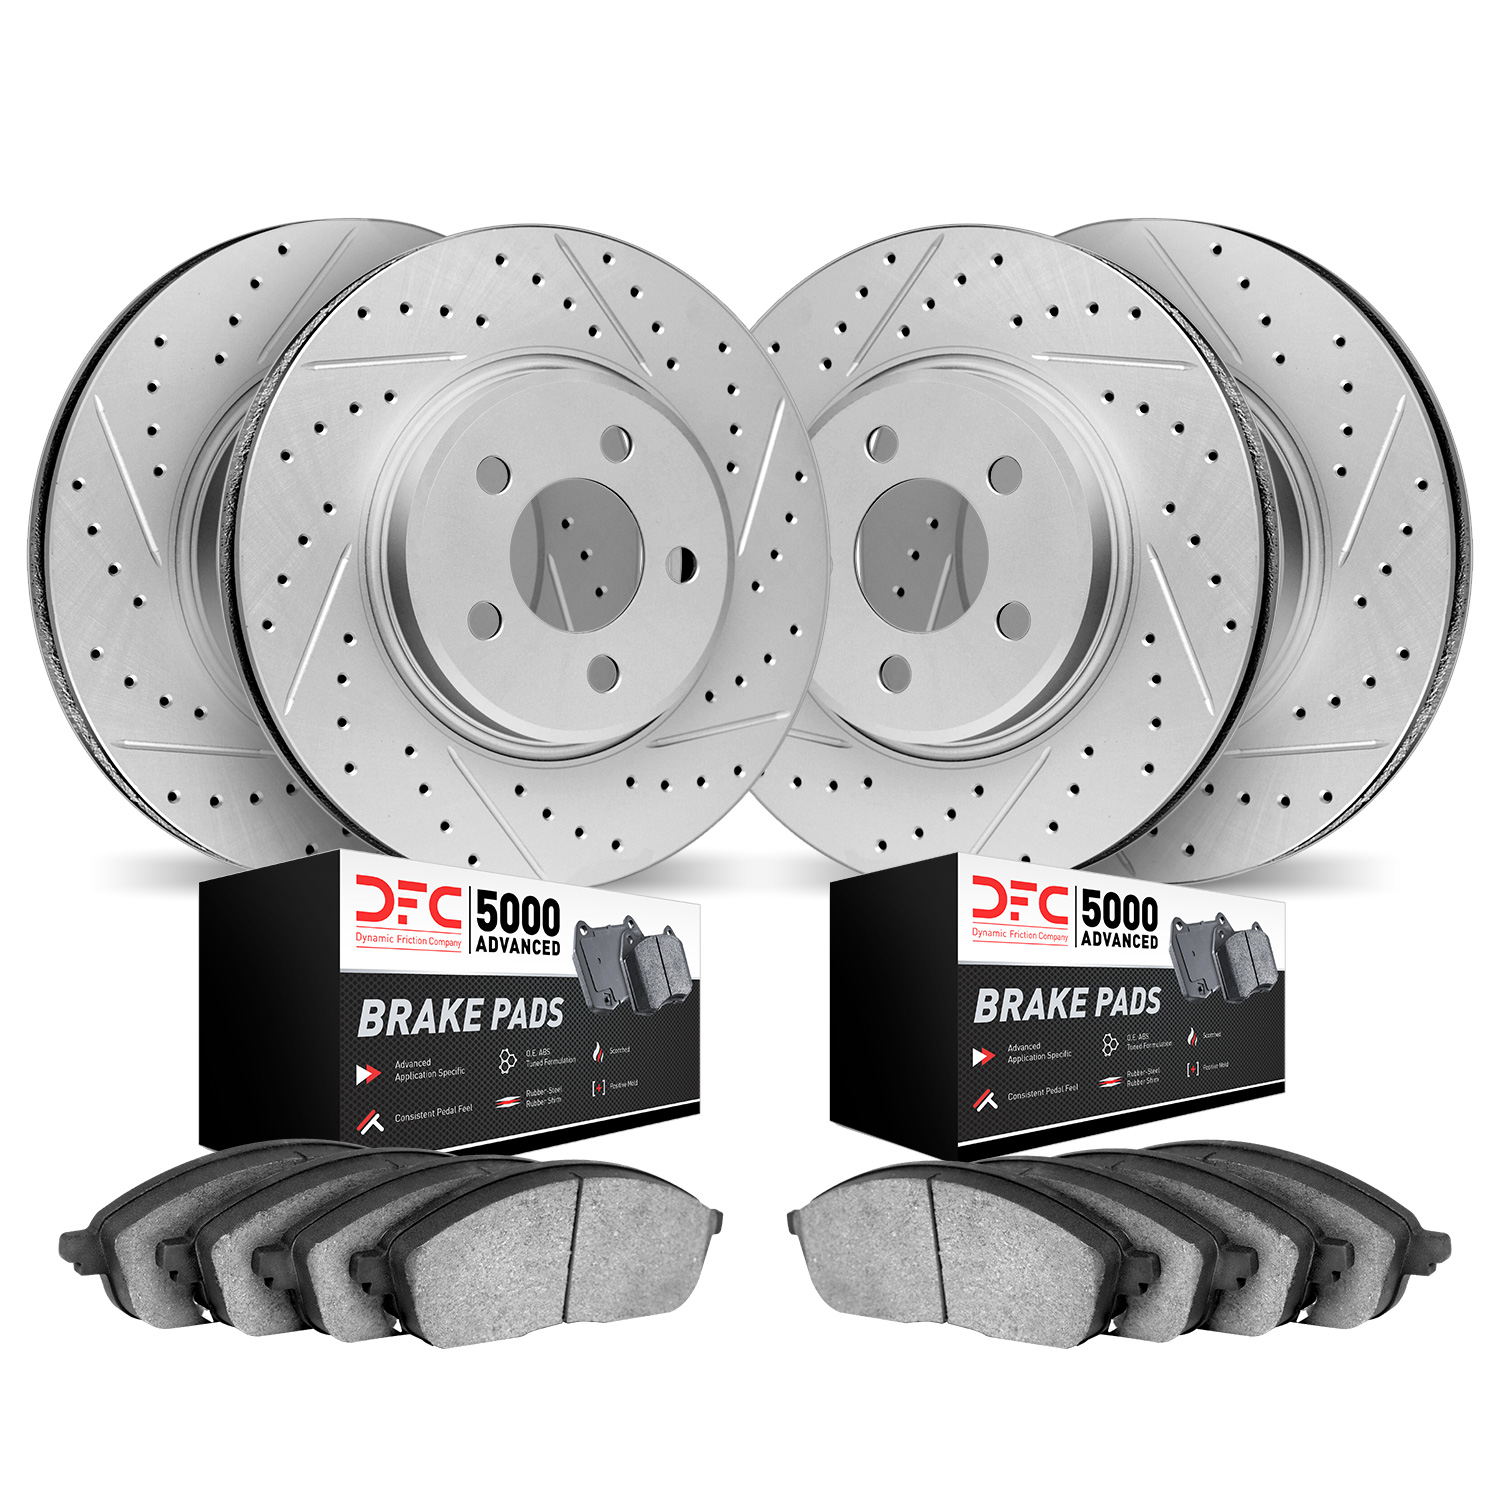 2504-02029 Geoperformance Drilled/Slotted Rotors w/5000 Advanced Brake Pads Kit, 2014-2019 Porsche, Position: Front and Rear